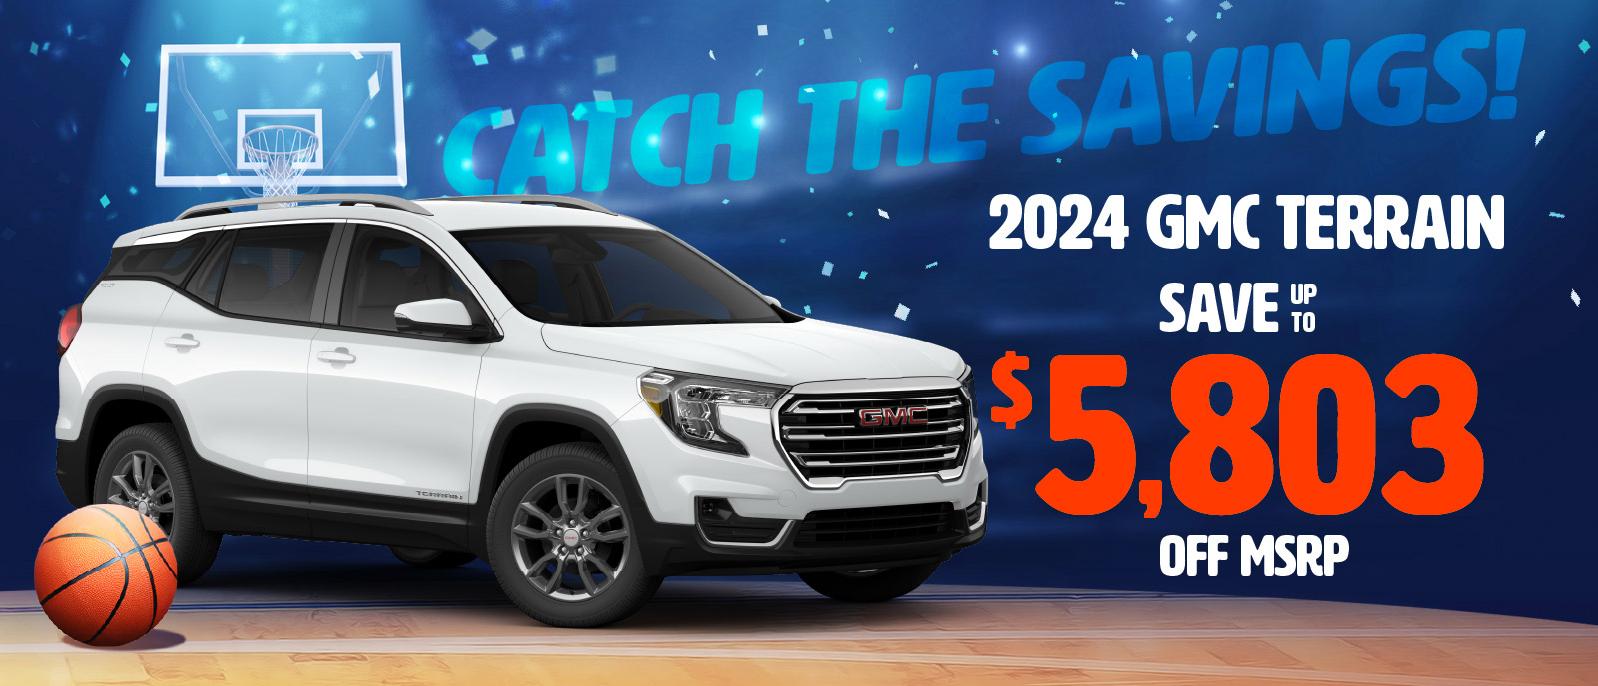 2024 GMC Terrain - save up to $5803